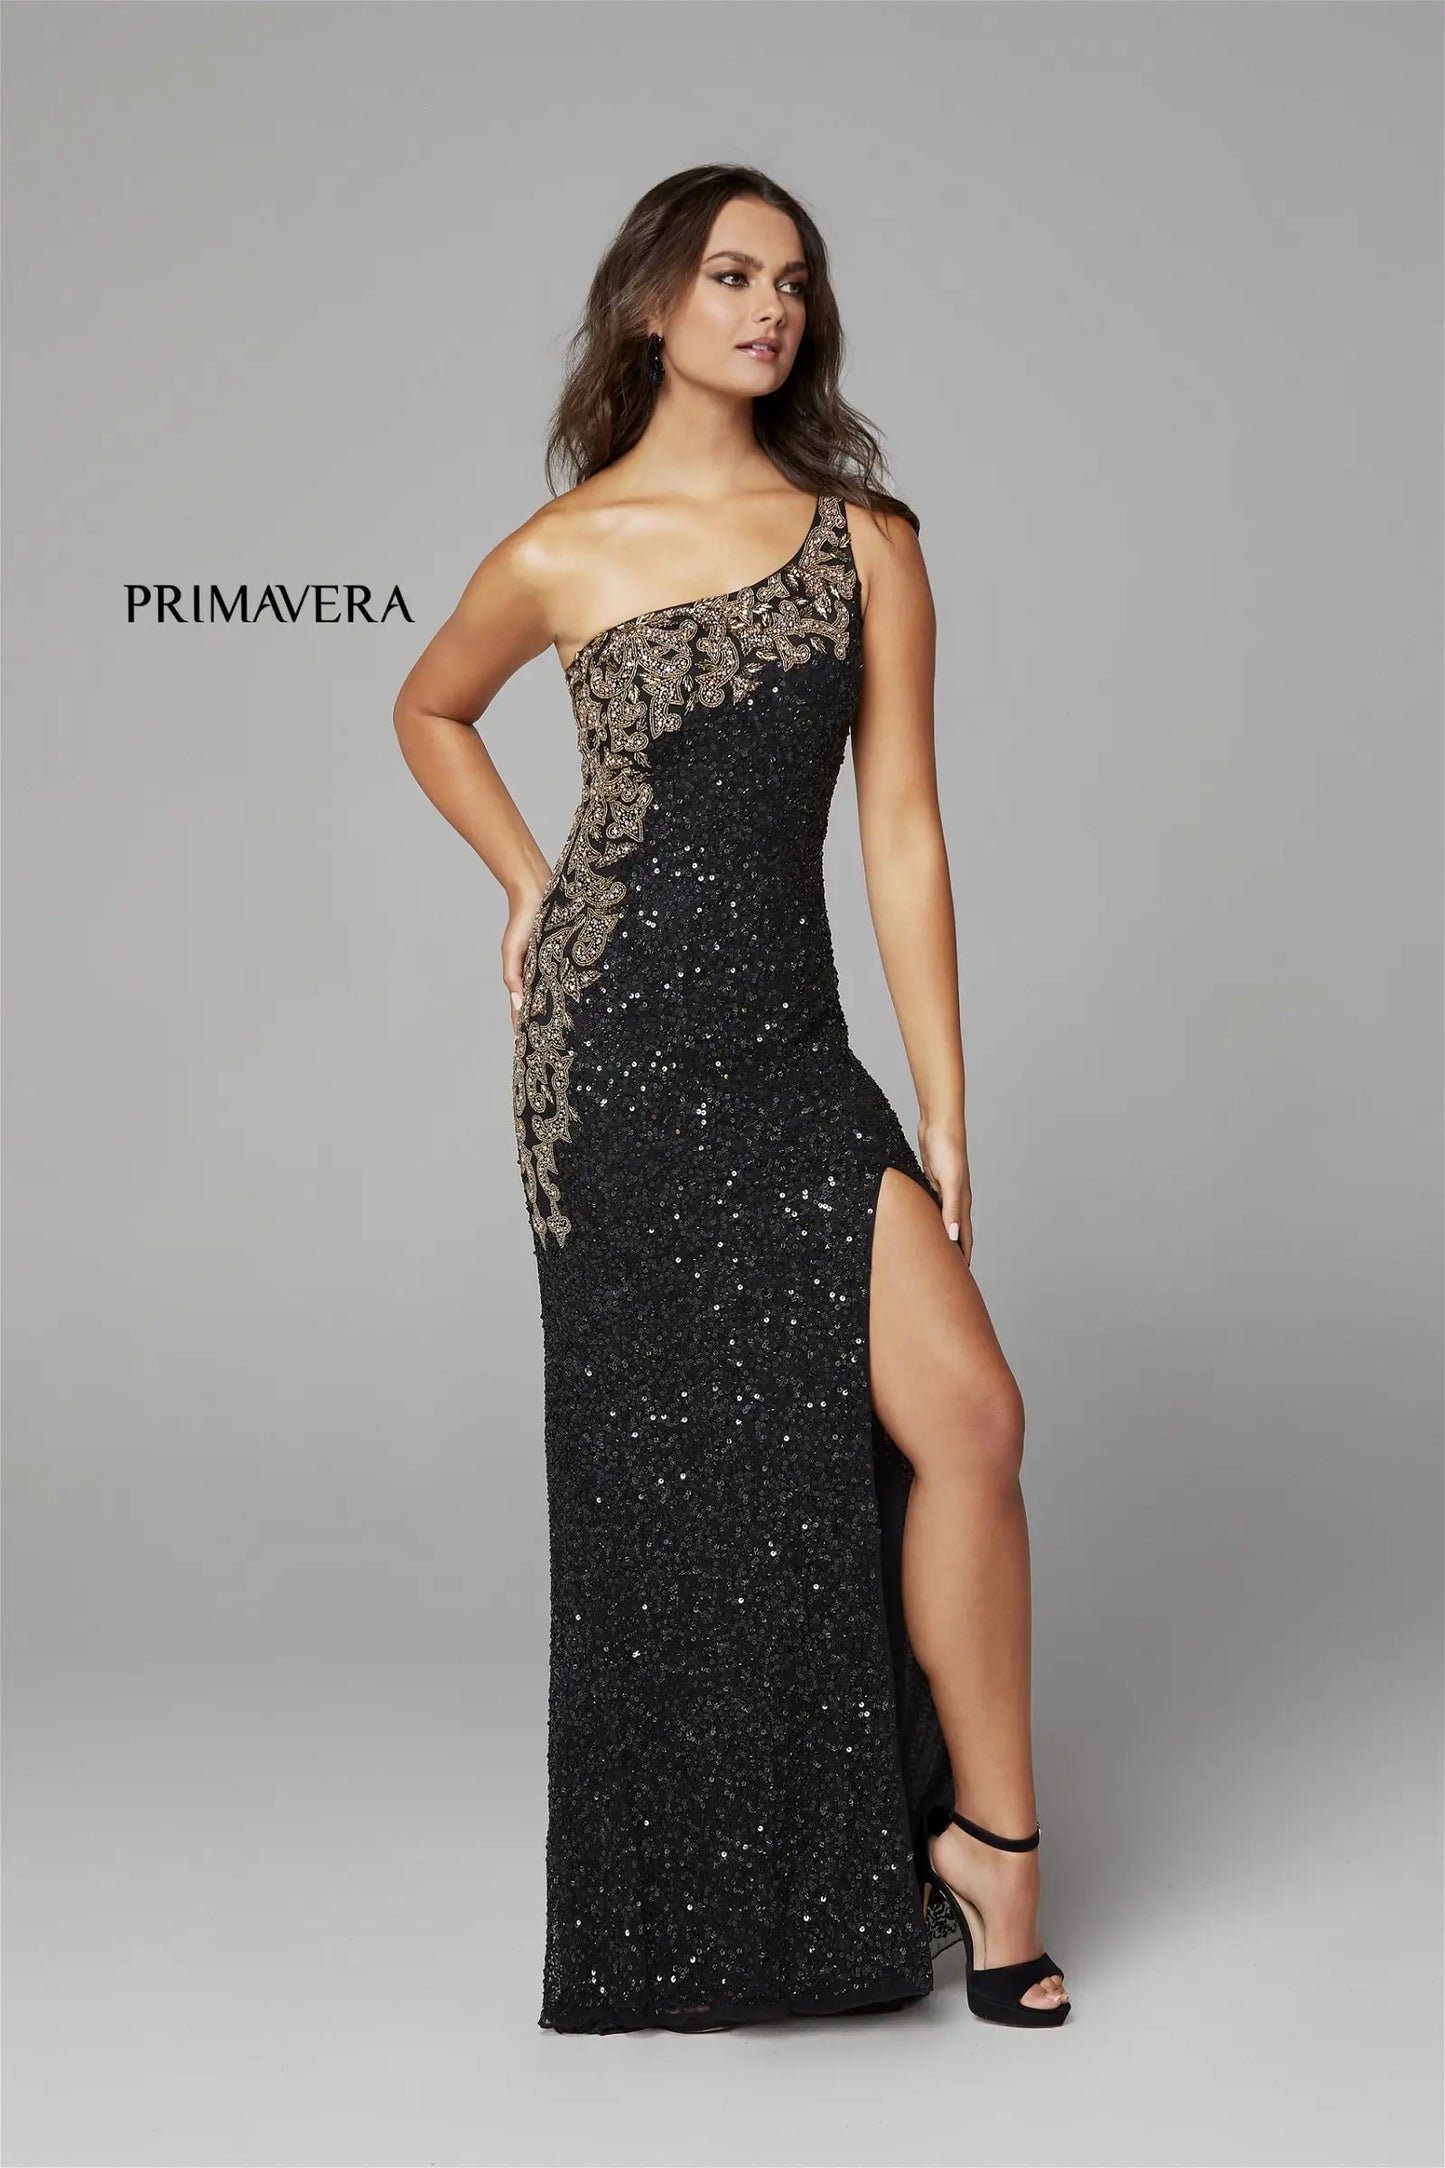 Primavera 3637 Sequined One Shoulder Evening Dress - A stunning gown with intricate sequin and bead embellishments, perfect for evening events.